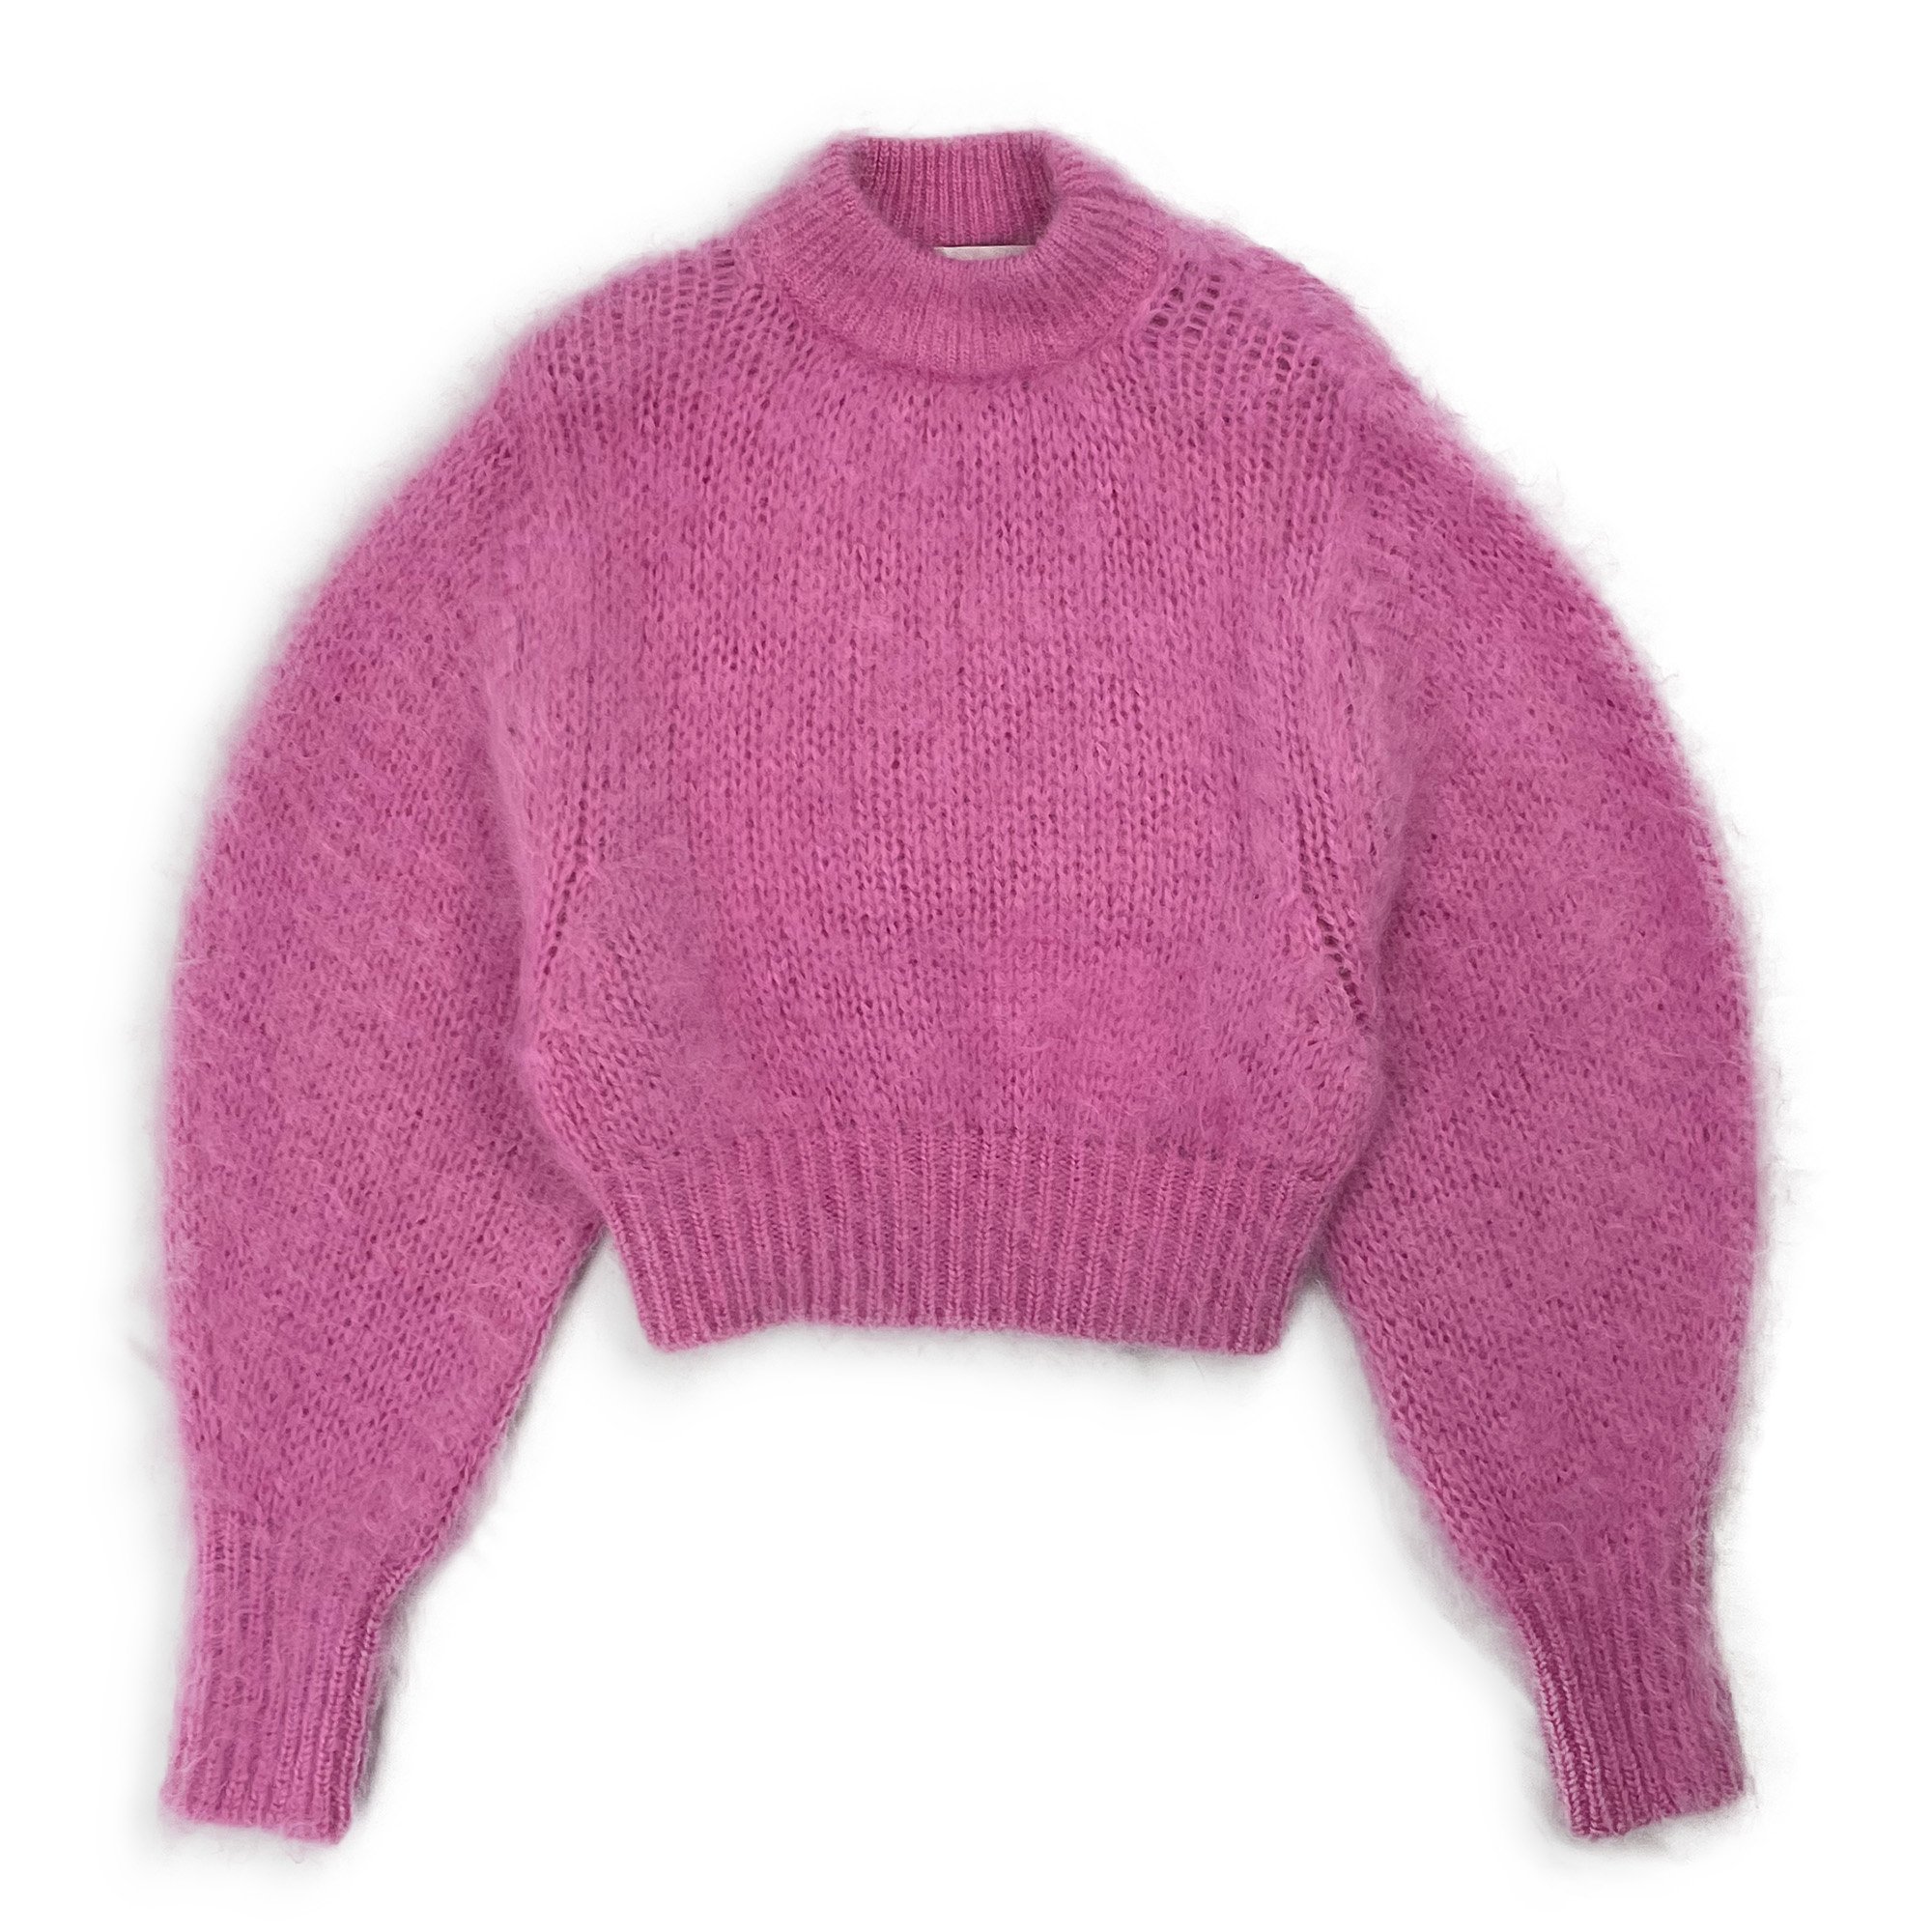 <img class='new_mark_img1' src='https://img.shop-pro.jp/img/new/icons21.gif' style='border:none;display:inline;margin:0px;padding:0px;width:auto;' />NINARICCI  L/S KNIT PULLOVER【30%OFF】